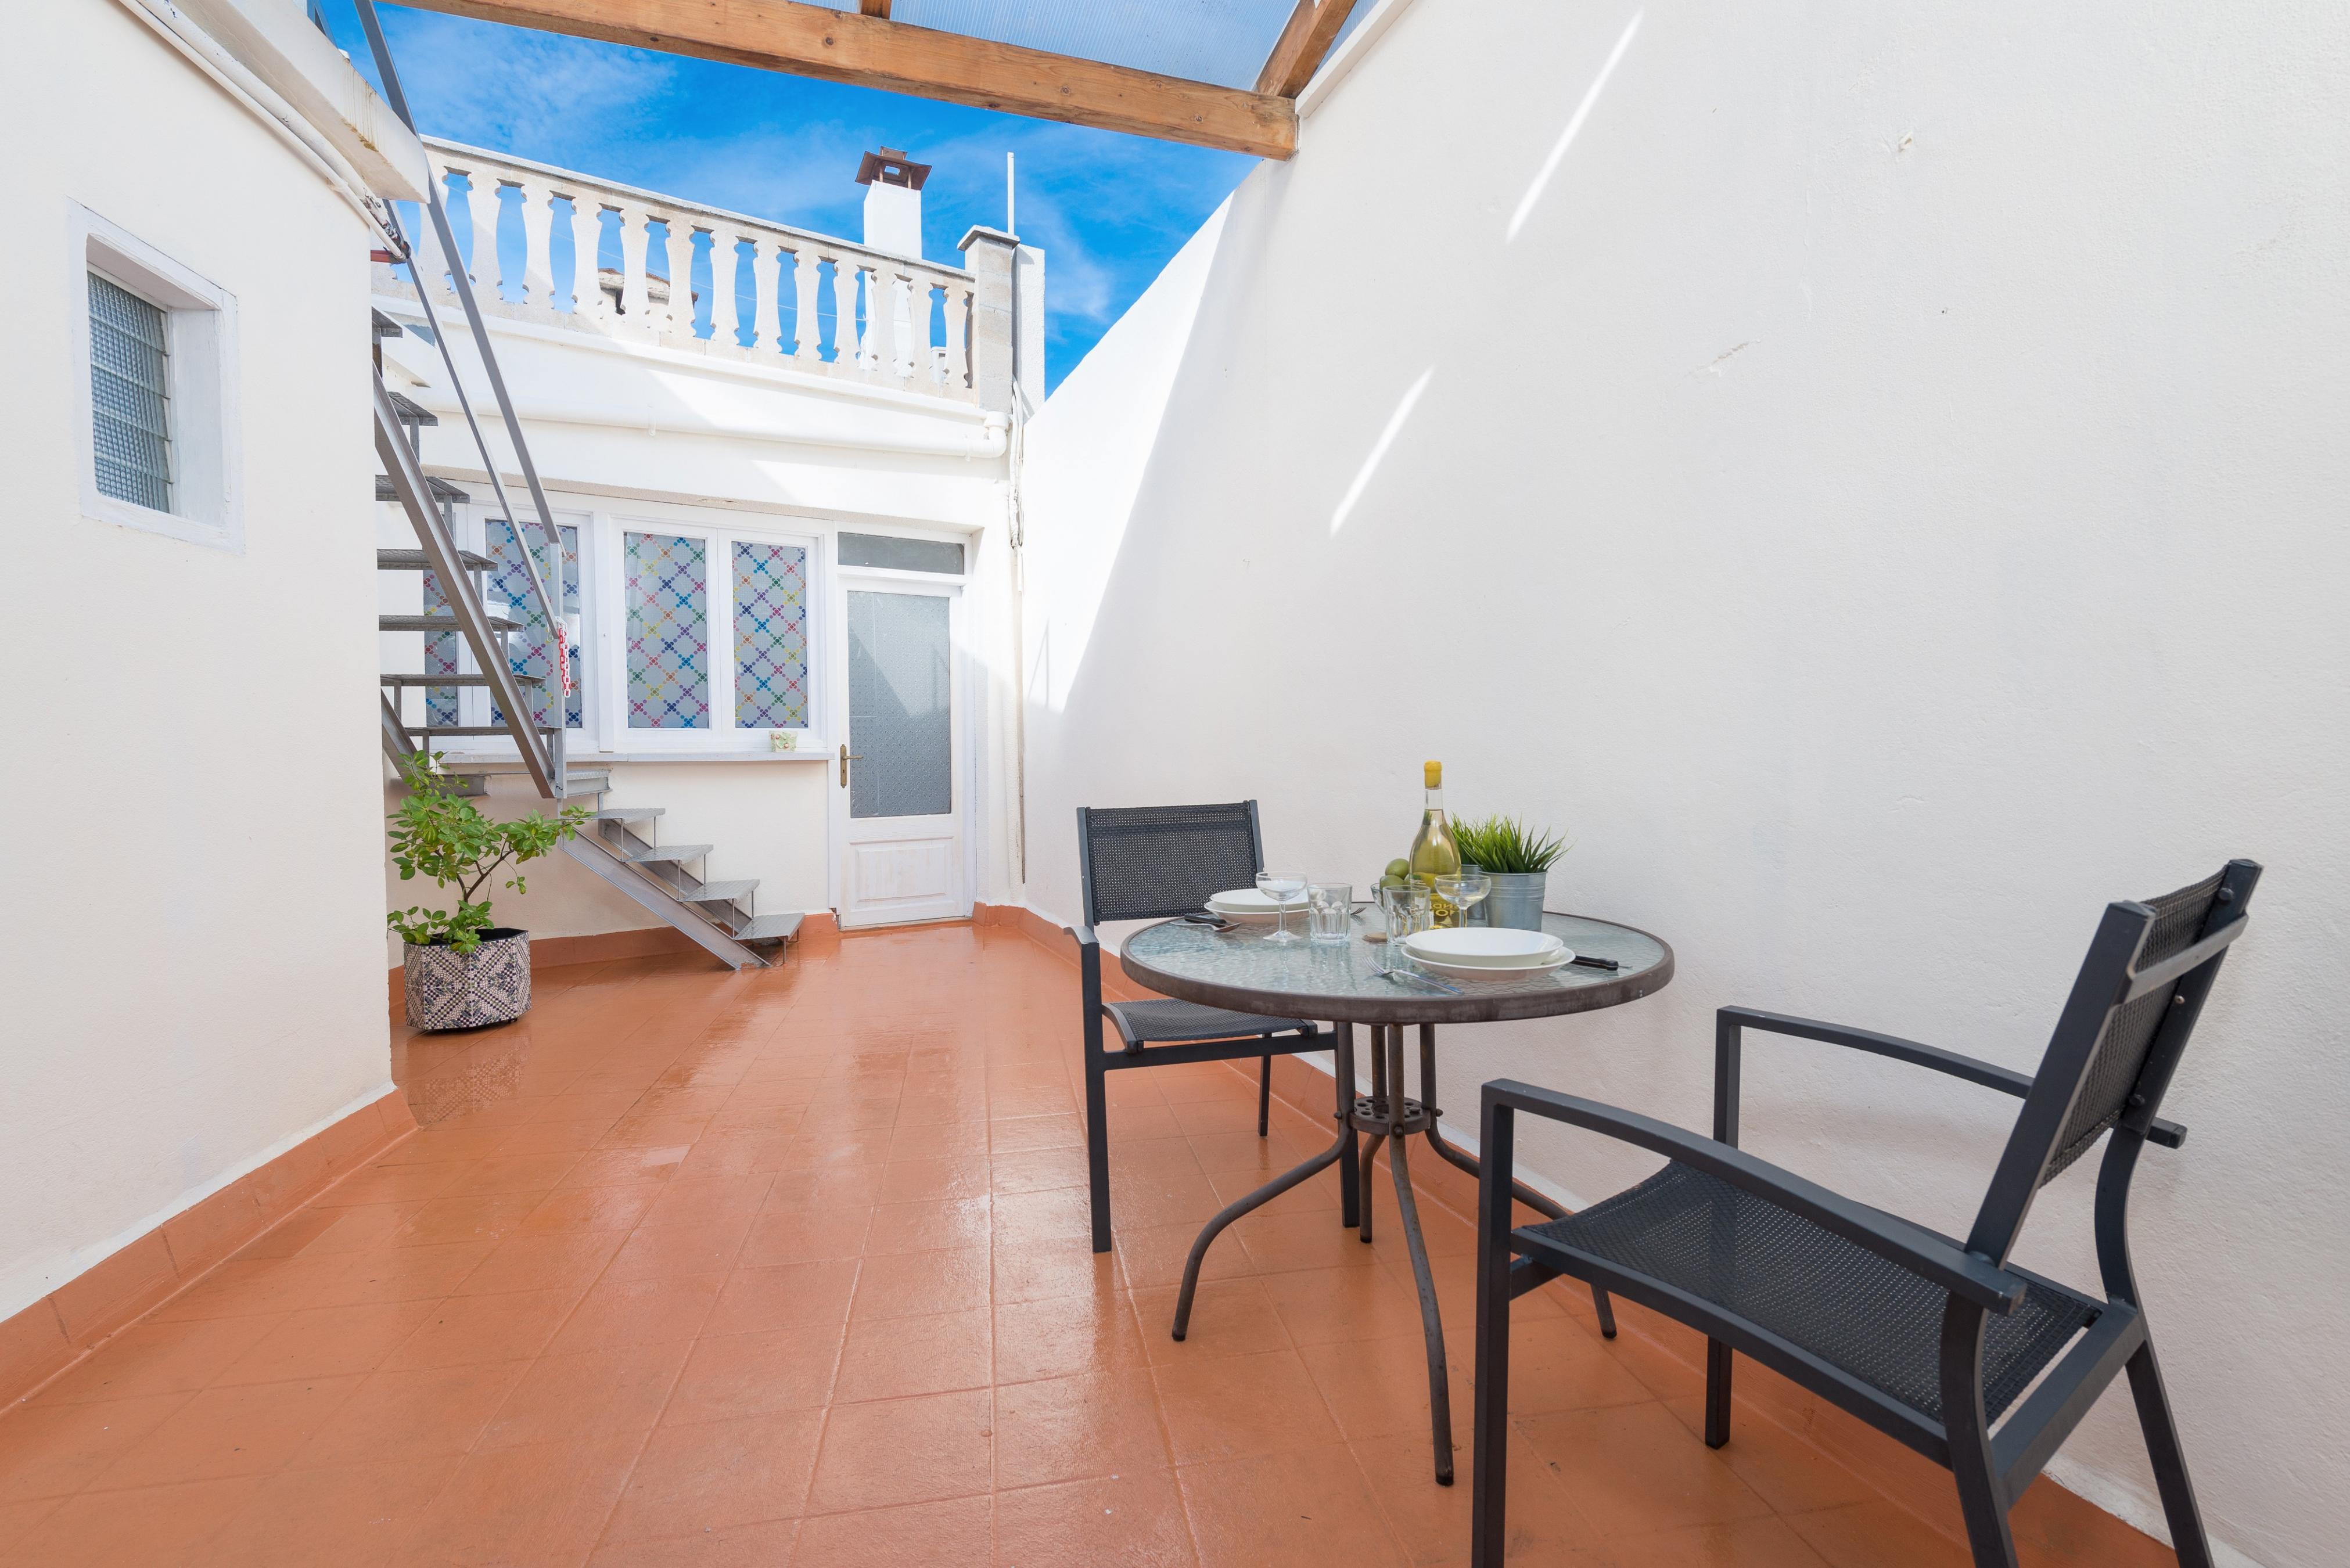 Property Image 1 - MARGARITAS - Fantastic townhouse in Santa Margalida, boasting a great terrace and only 9 km away from the 